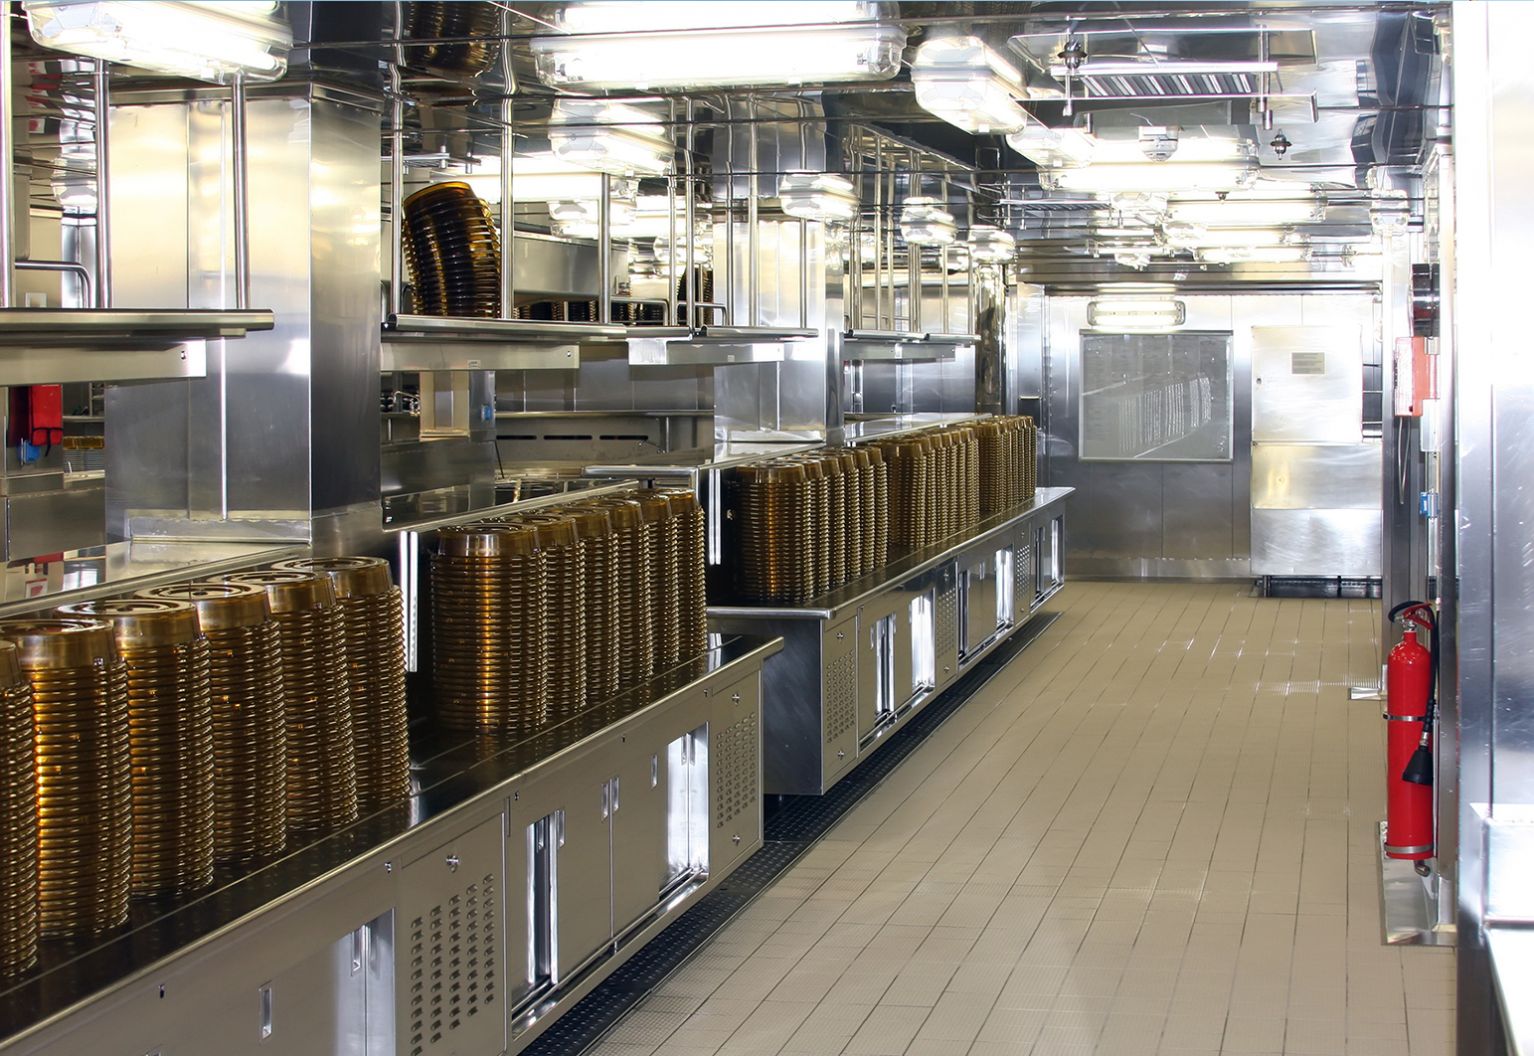 Drew Marine’s Crew Care Cleaning Programs are complete product suites for Floor Maintenance, Hand Cleaners, Galley and Breakroom Cleaners, General Purpose and Laundry.